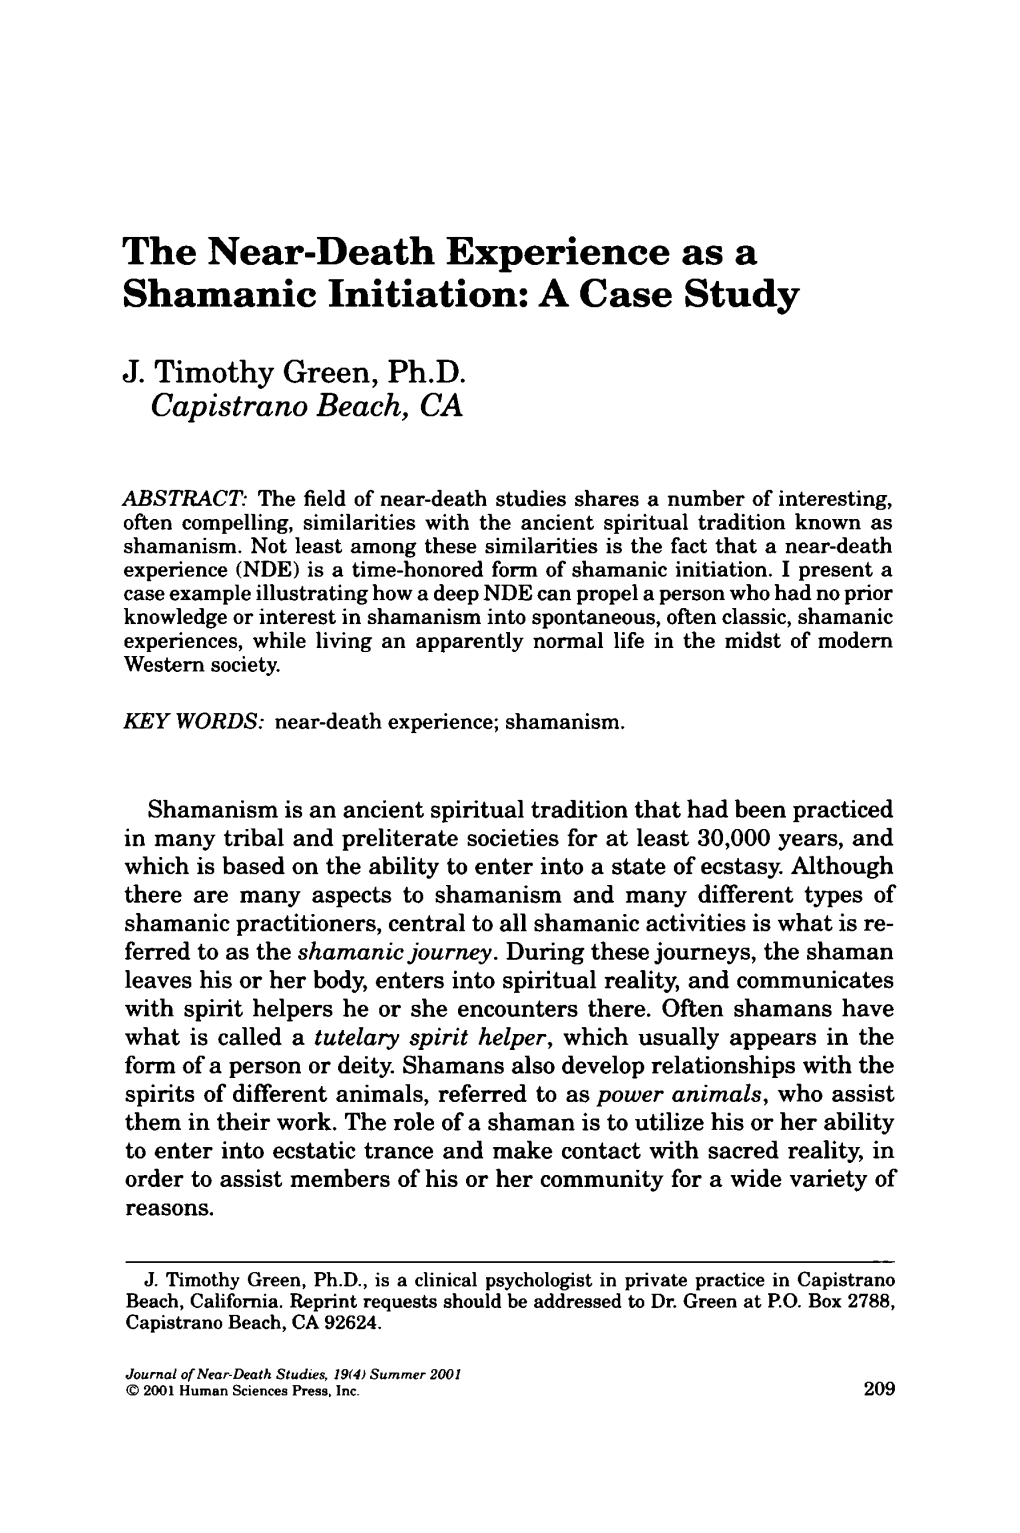 The Near-Death Experience As a Shamanic Initiation: a Case Study